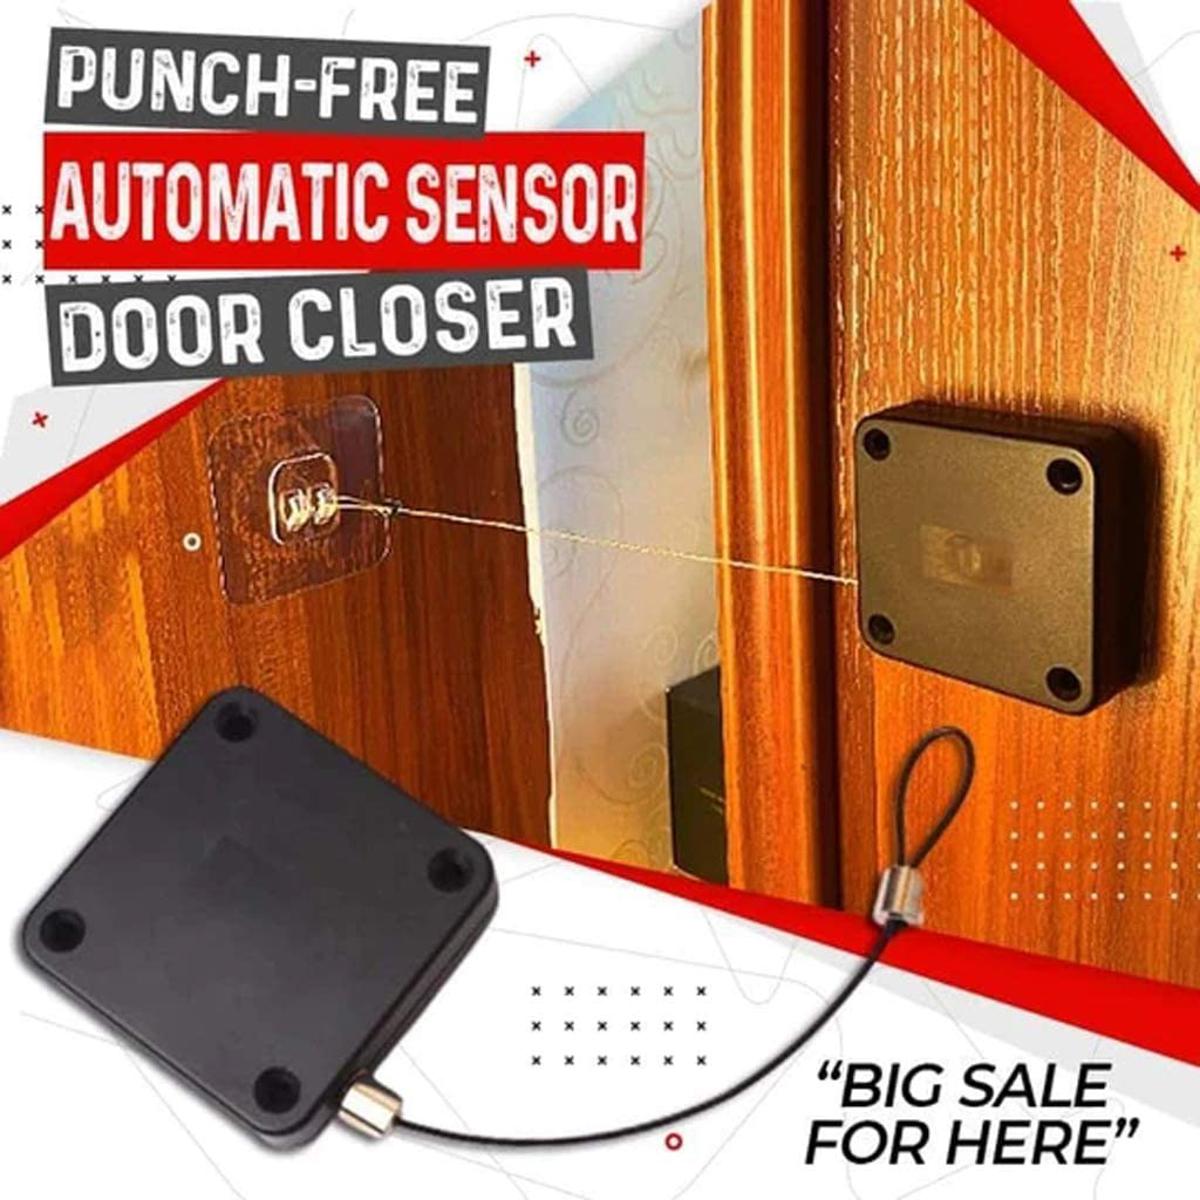 Introducing the Innovative Automatic Anti-Punching Door Closer: Ensuring Optimal Security